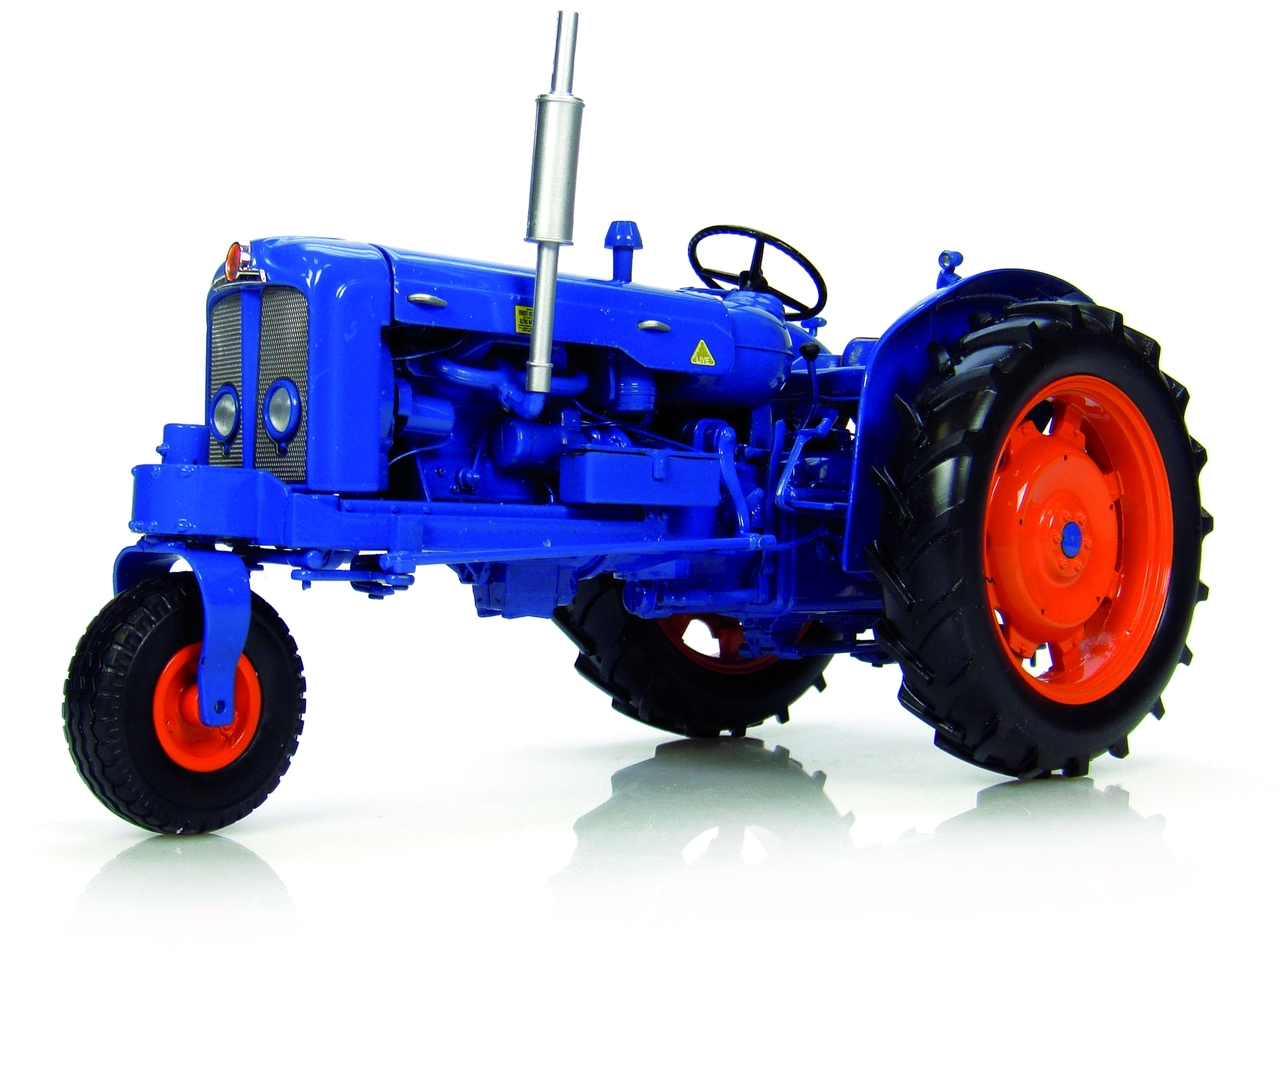 Fordson Super Major Narrow Row Crop Version Tricycle Tractor 1/16 Diecast Model by Universal Hobbies